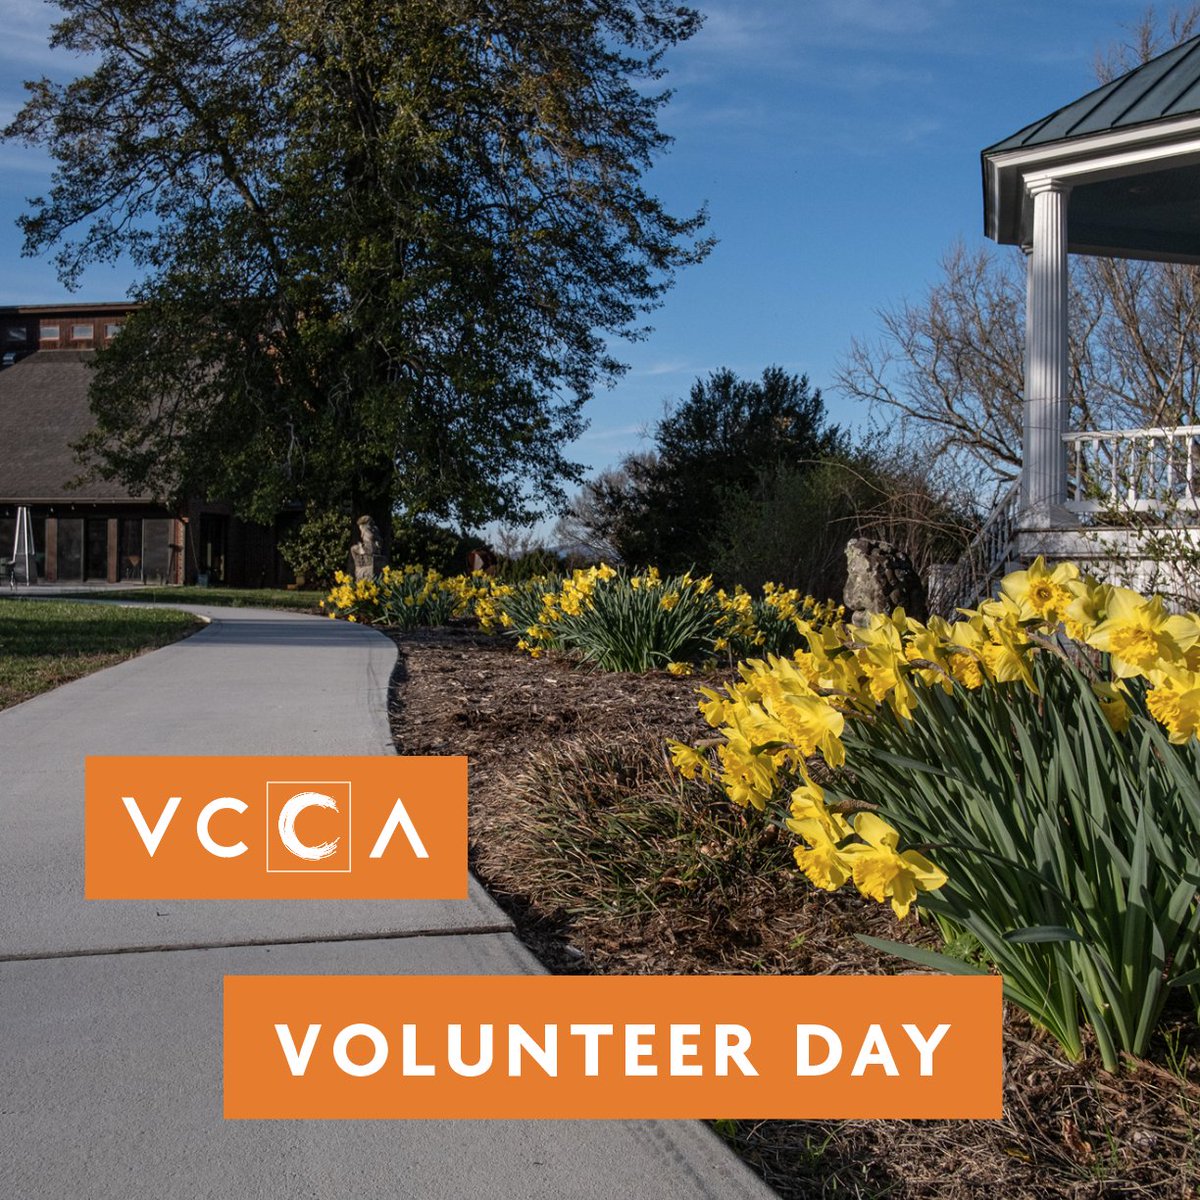 We're looking for volunteers to join us at VCCA for some light spring gardening on Saturday, April 6! Lunch will be provided. Please sign up by Tuesday, April 2, to help us best plan for food. vcca.com/news-events/vo…